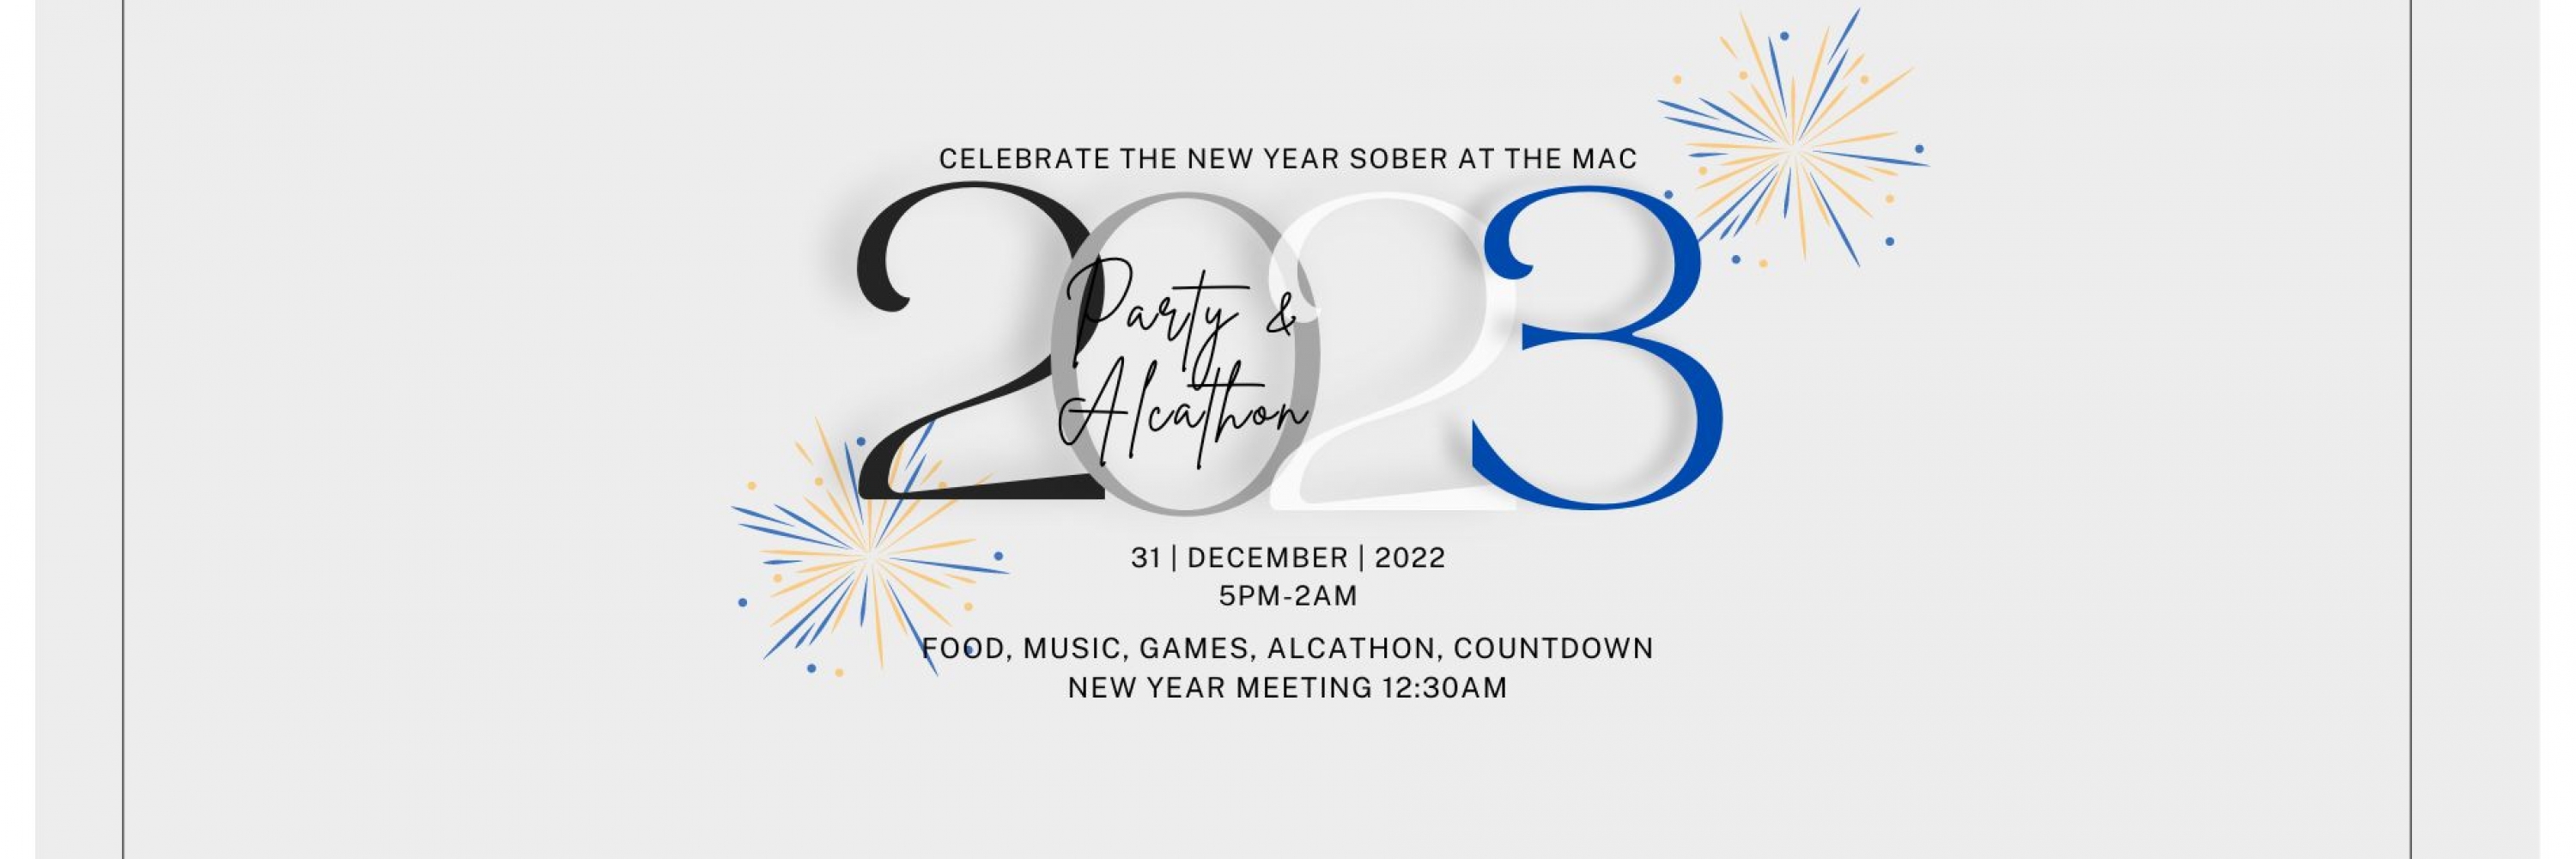 new-years-eve-at-the-mac-website-banner